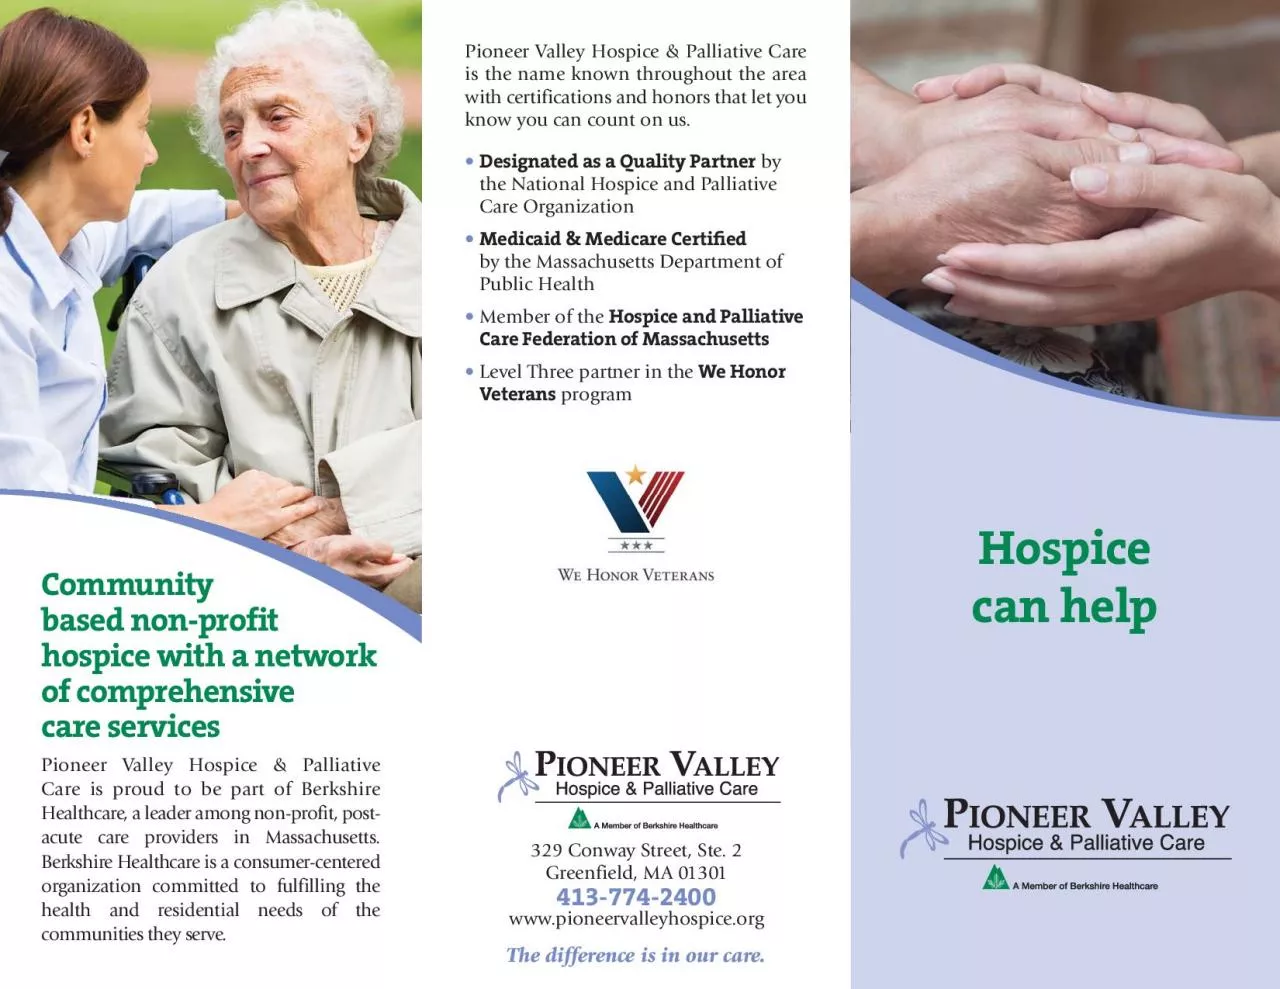 can helpCommunity based nonprofit hospice with a networkof comprehens